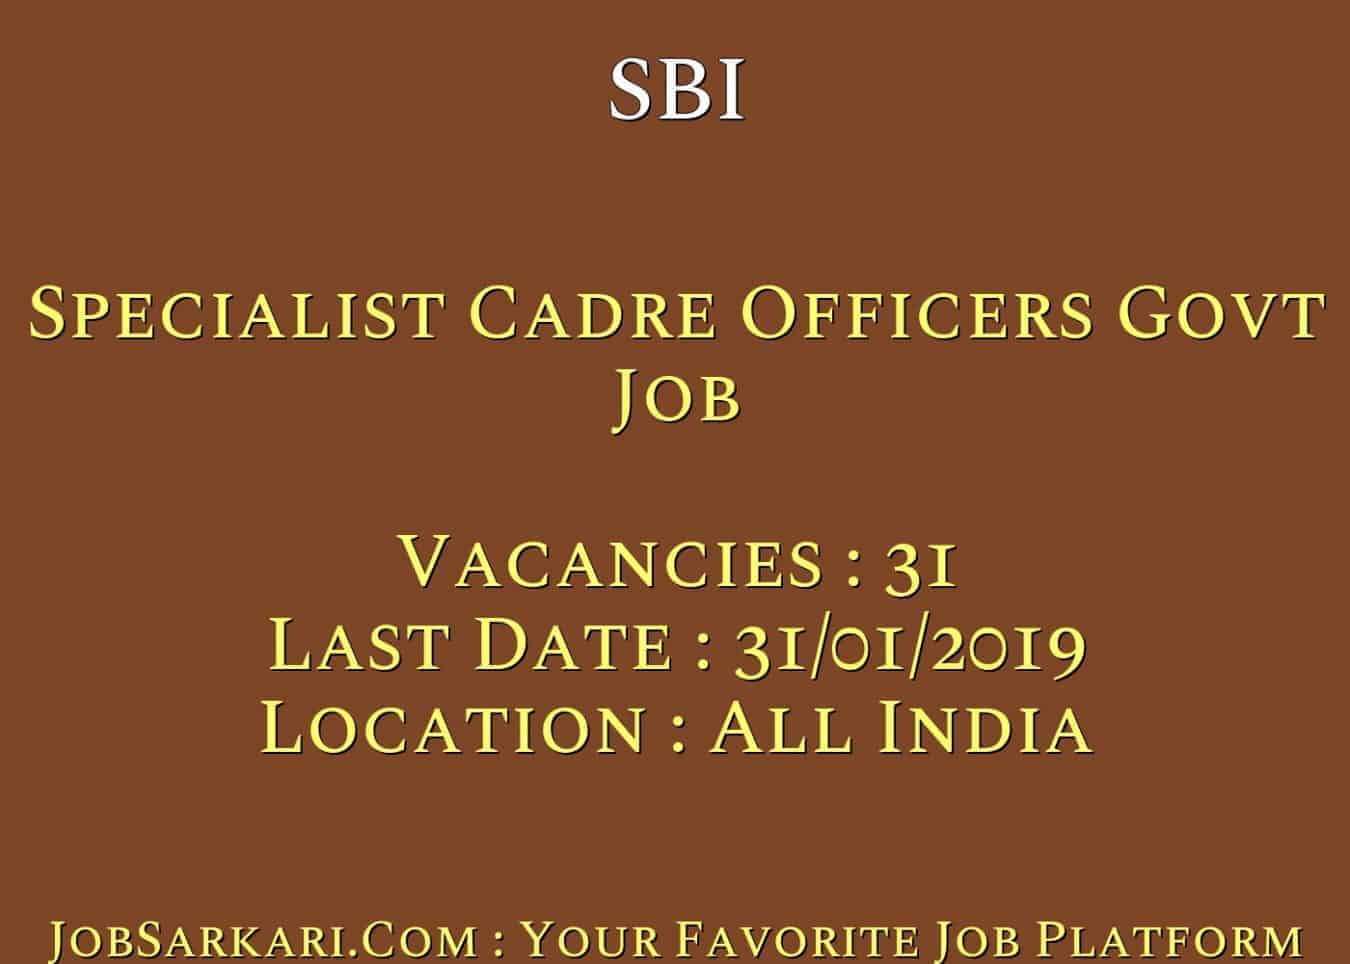 SBI Recruitment 2019 For Specialist Cadre Officers Govt Job